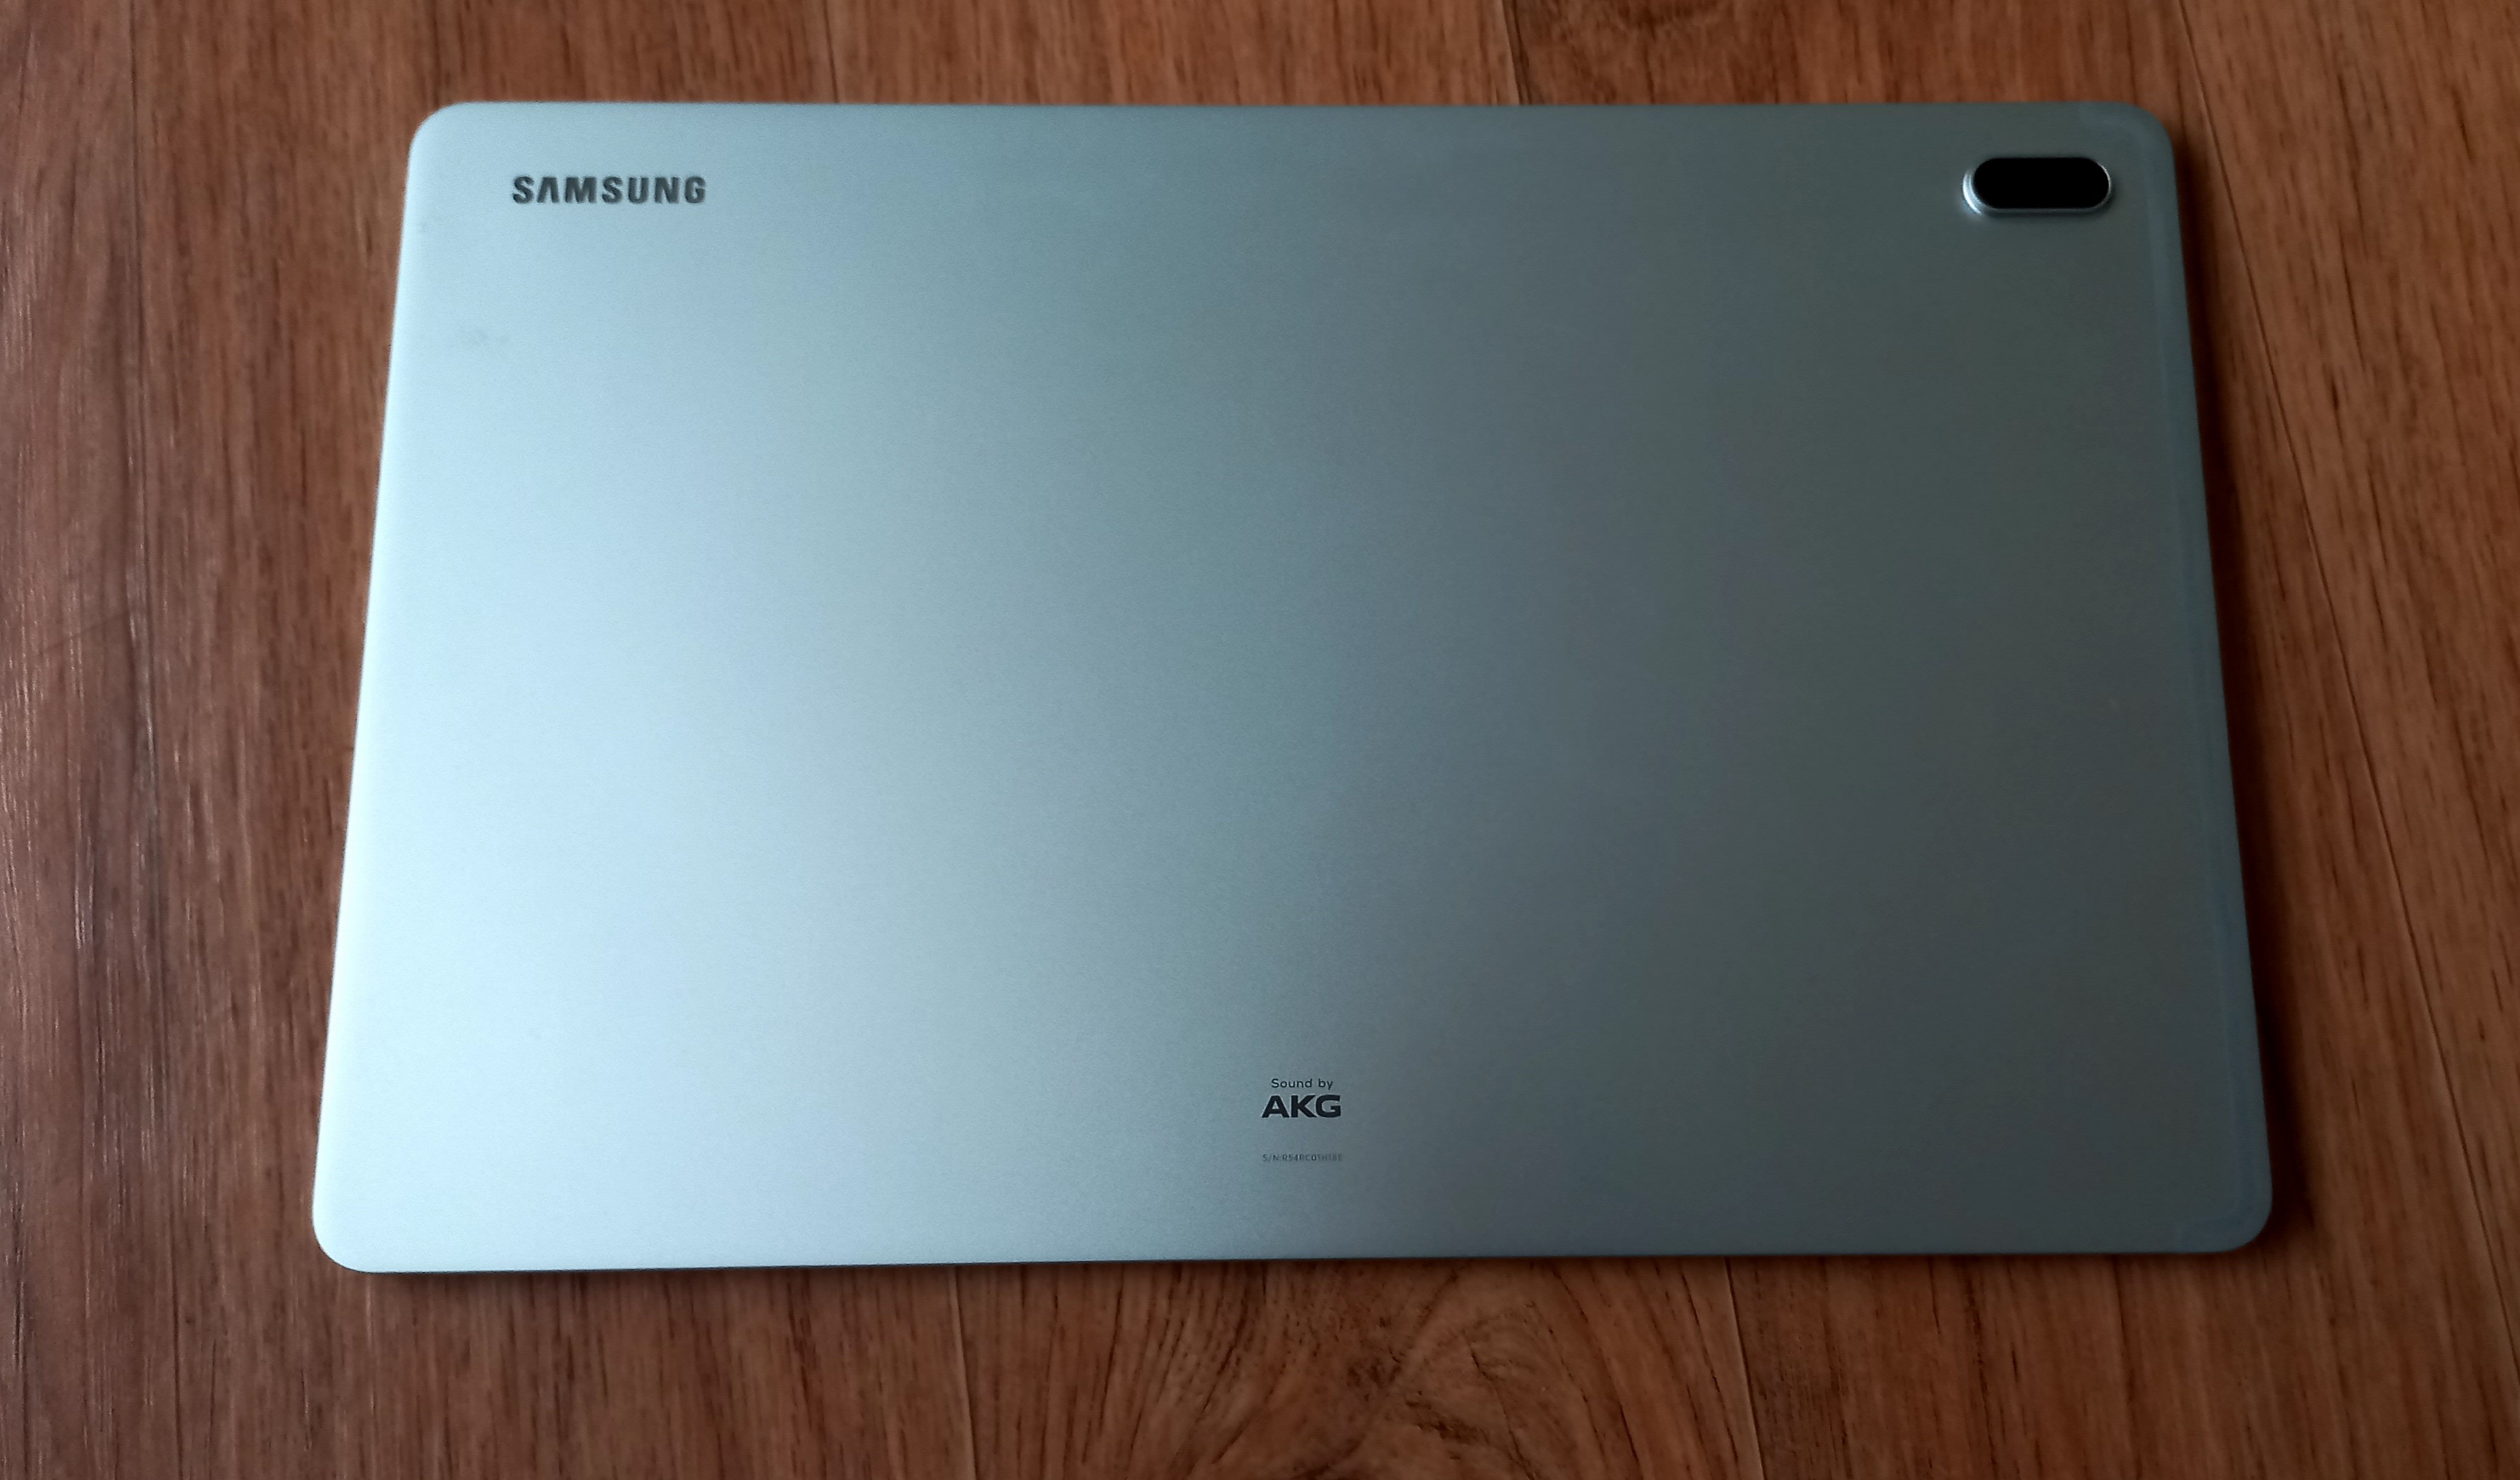 Samsung Galaxy Tab S7 FE 5G (2021) - Unboxing and First Impressions! 